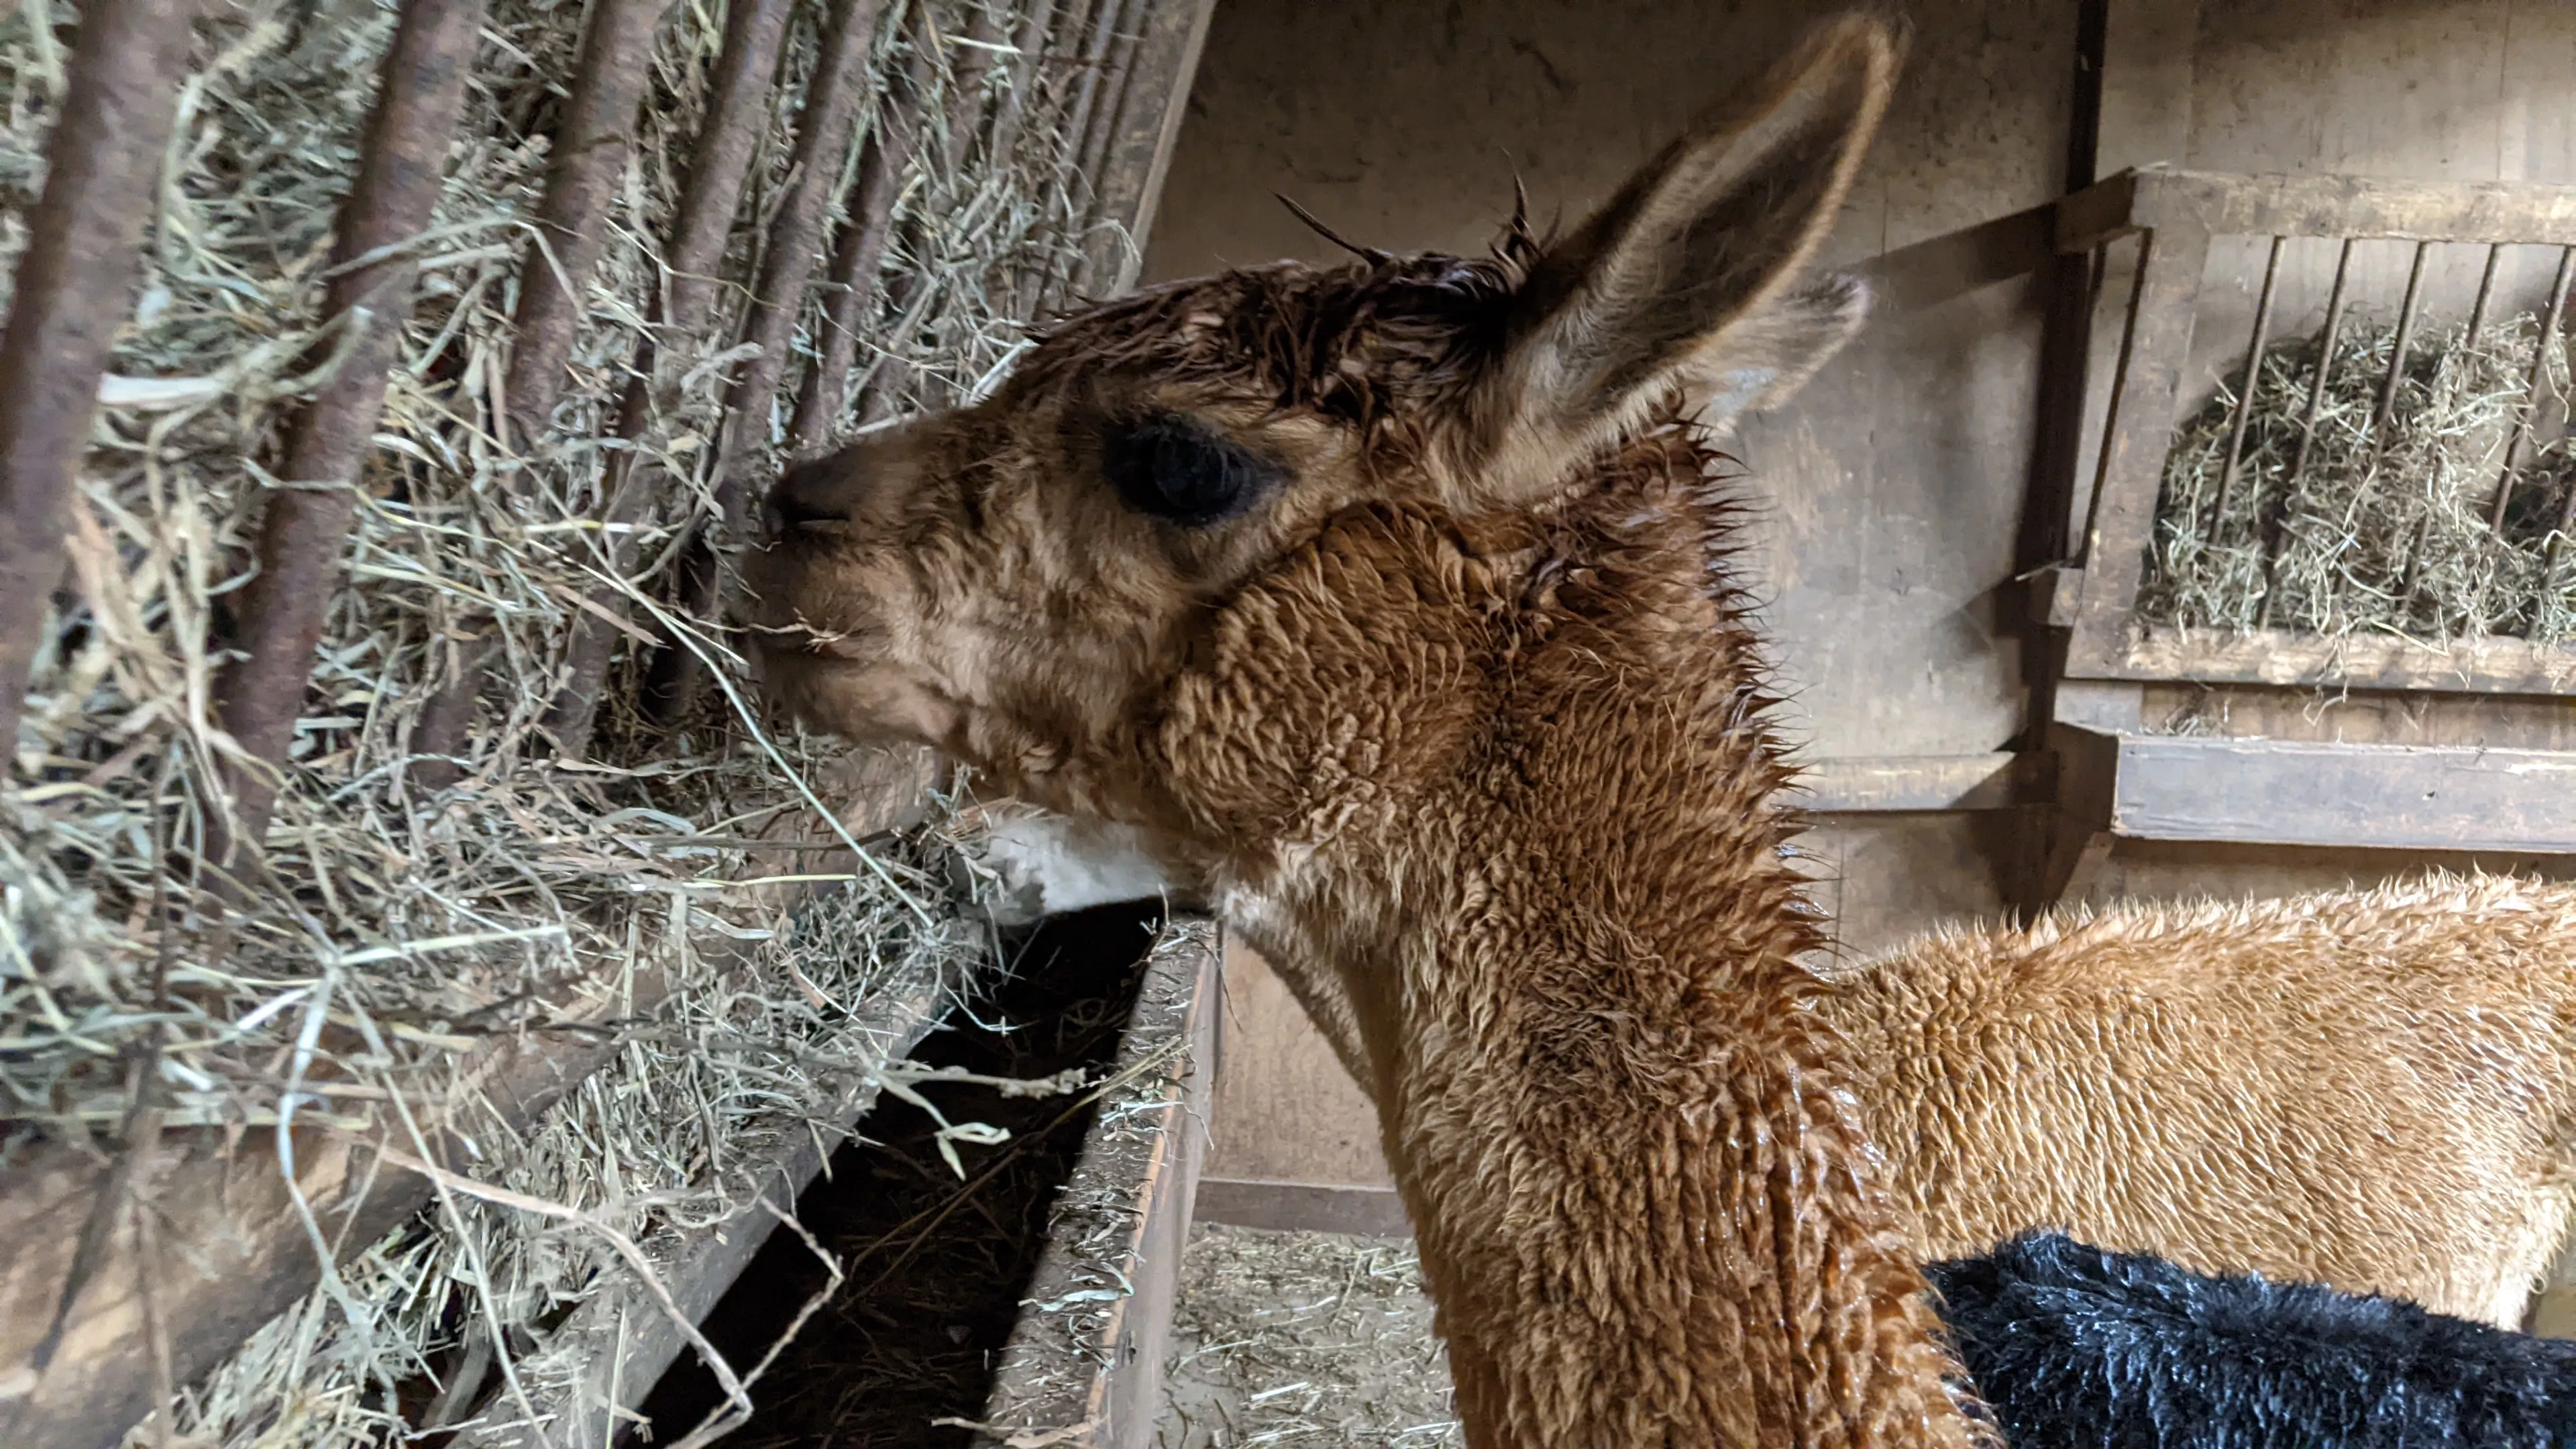 An image of an alpaca named Clare in the barn eating hay